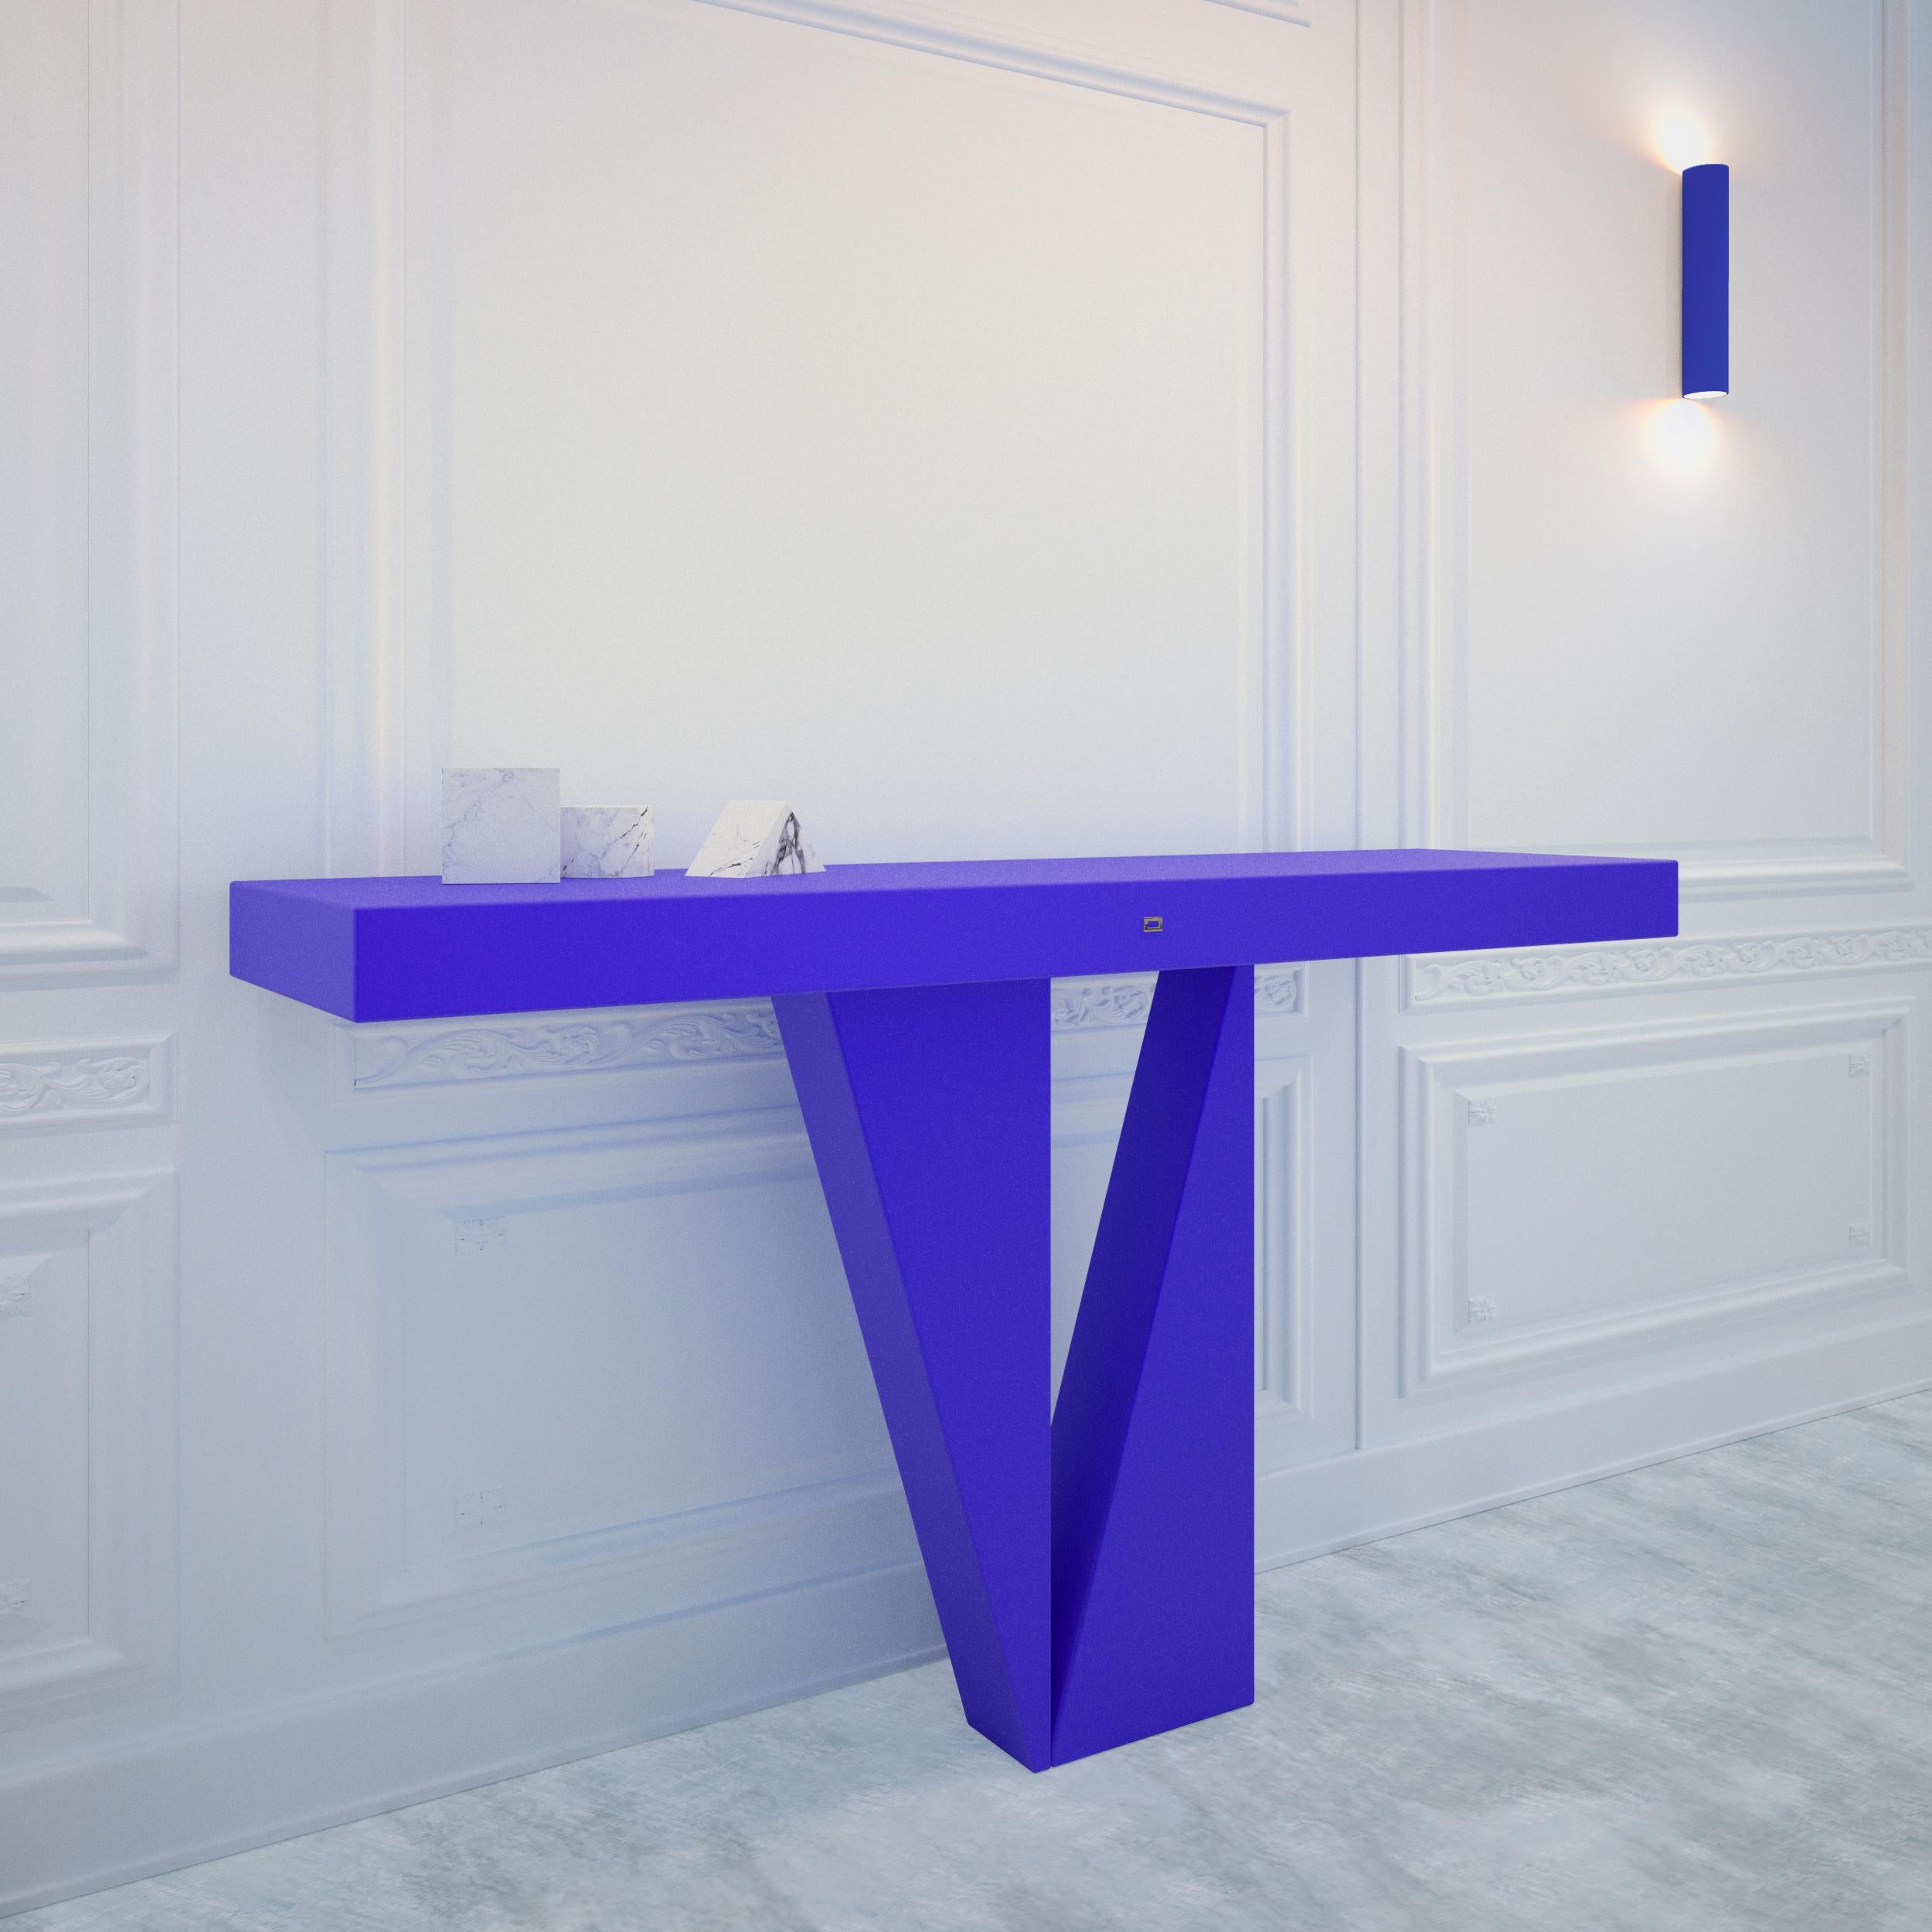 Console Table / Sideboard
by FELIX SCHWAKE
FS 52
CM L140 B35 H83
IN L55,12 B13,78 H32,68
Material – Wood
Surface – Blue Lacquer, Matt
2023

Customizations on request.

Functional Art Sculpture.
One of a kind piece.
Made to order by award winning